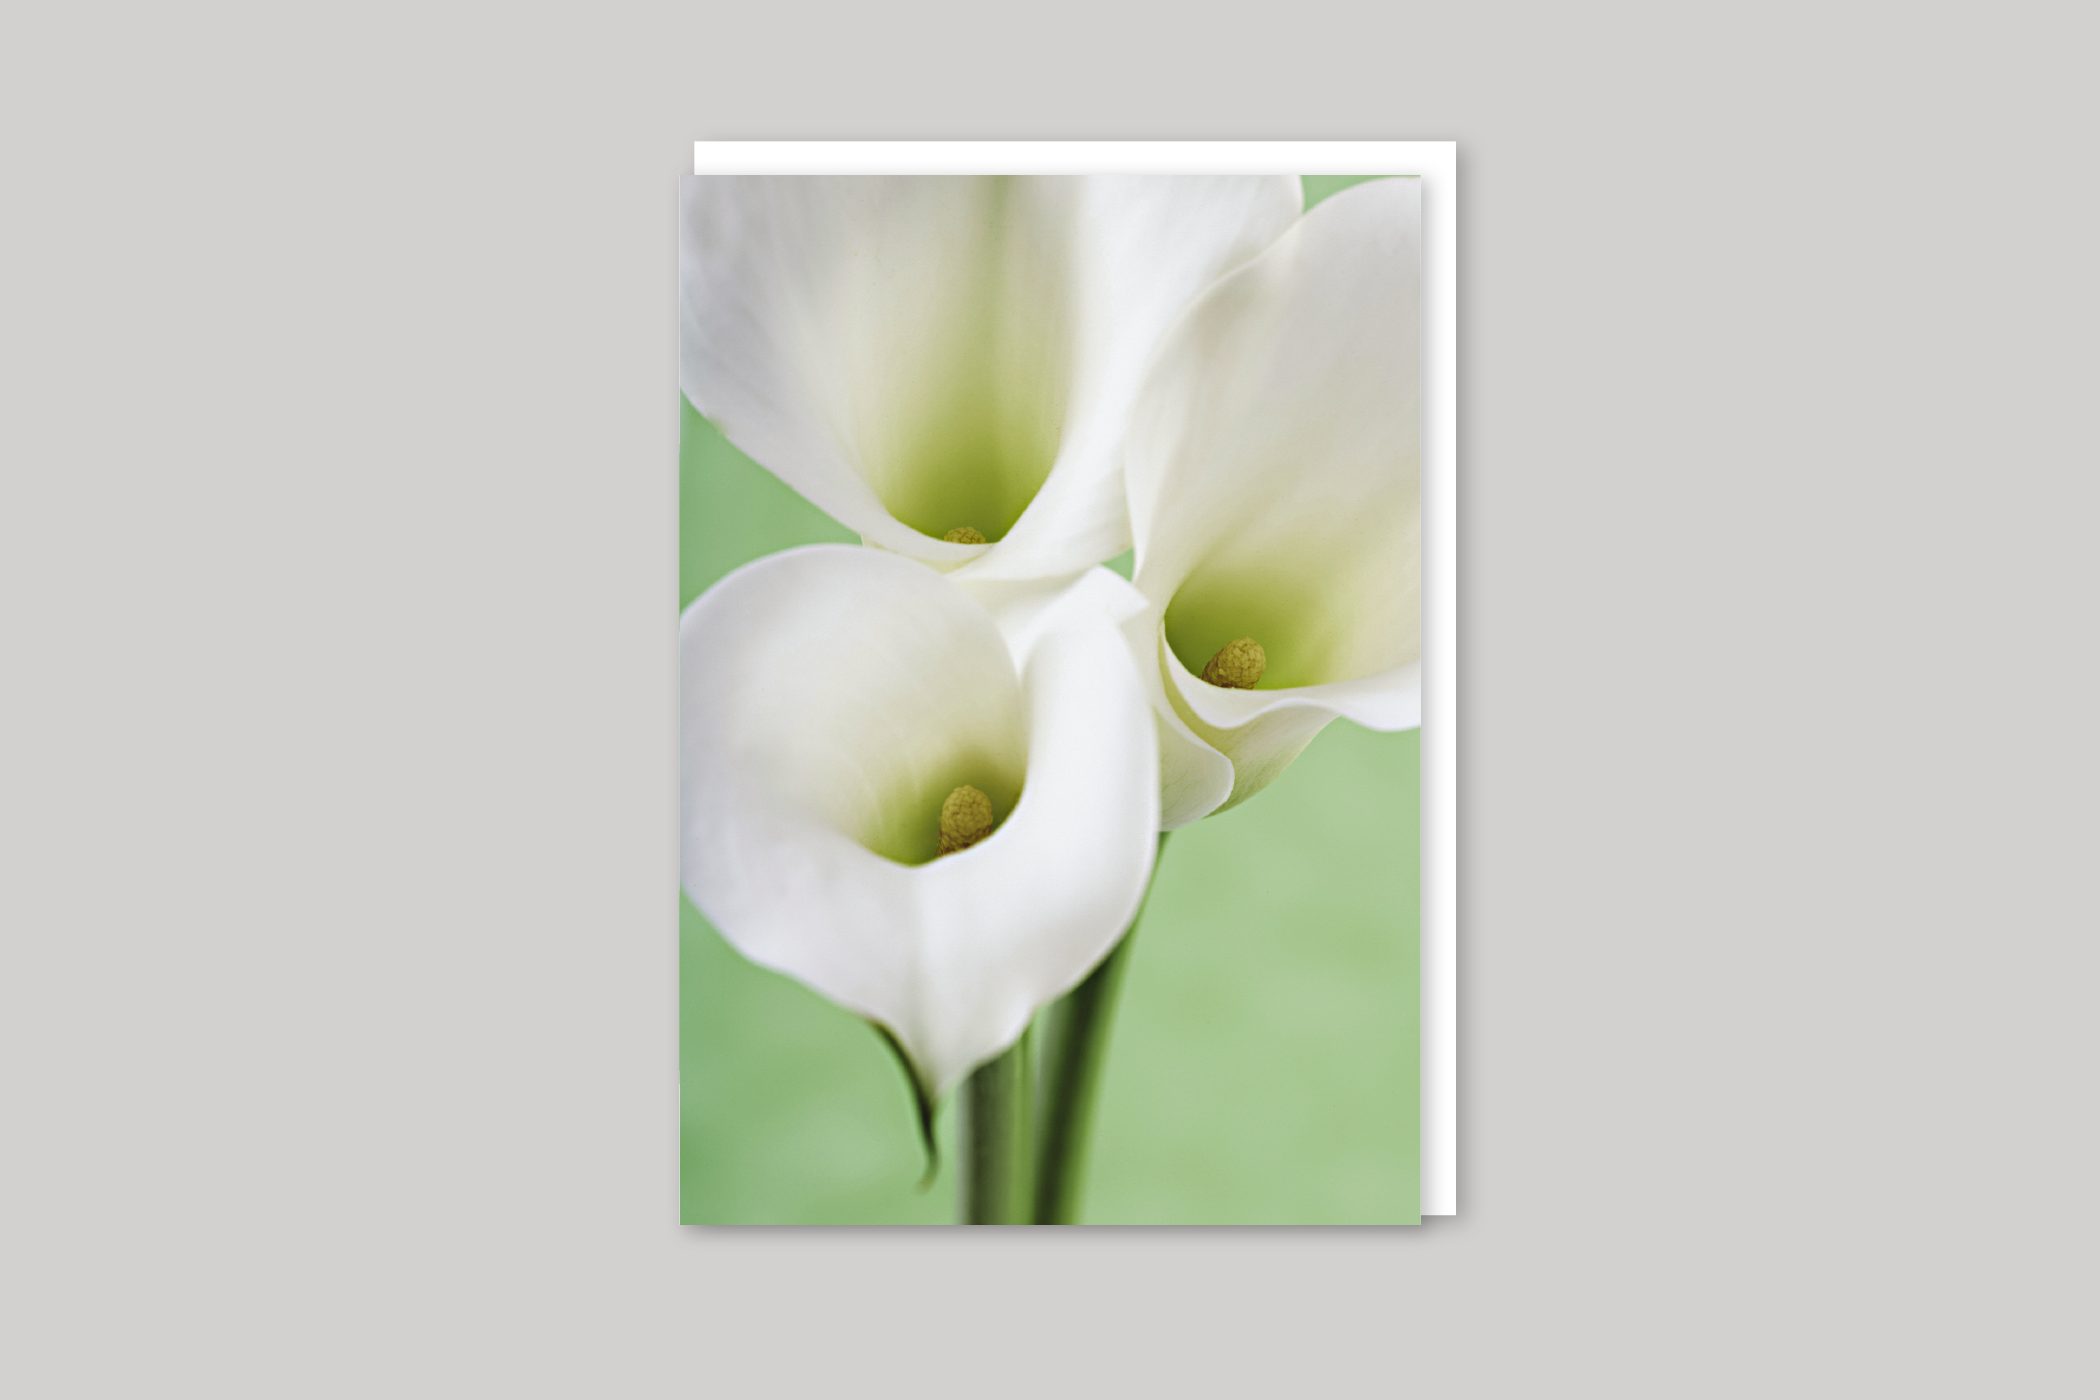 Calla Lilies sympathy card from Exposure range of photographic cards by Icon, back page.